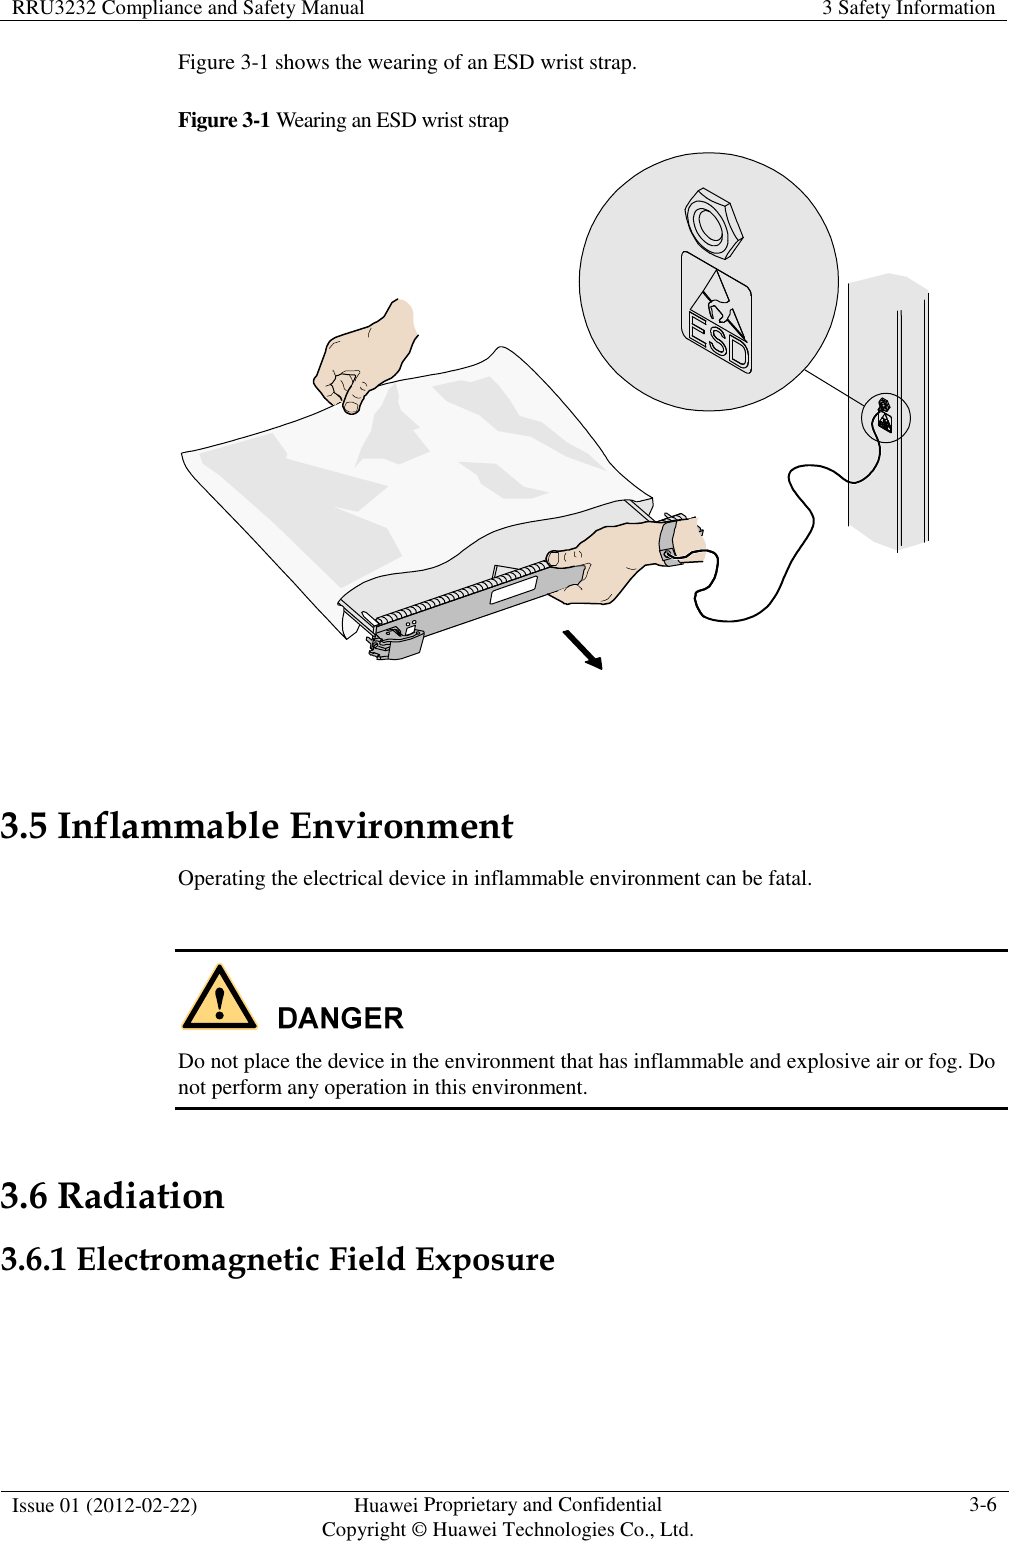 RRU3232 Compliance and Safety Manual  3 Safety Information  Issue 01 (2012-02-22)  Huawei Proprietary and Confidential           Copyright © Huawei Technologies Co., Ltd. 3-6  Figure 3-1 shows the wearing of an ESD wrist strap. Figure 3-1 Wearing an ESD wrist strap   3.5 Inflammable Environment Operating the electrical device in inflammable environment can be fatal.   Do not place the device in the environment that has inflammable and explosive air or fog. Do not perform any operation in this environment. 3.6 Radiation 3.6.1 Electromagnetic Field Exposure  